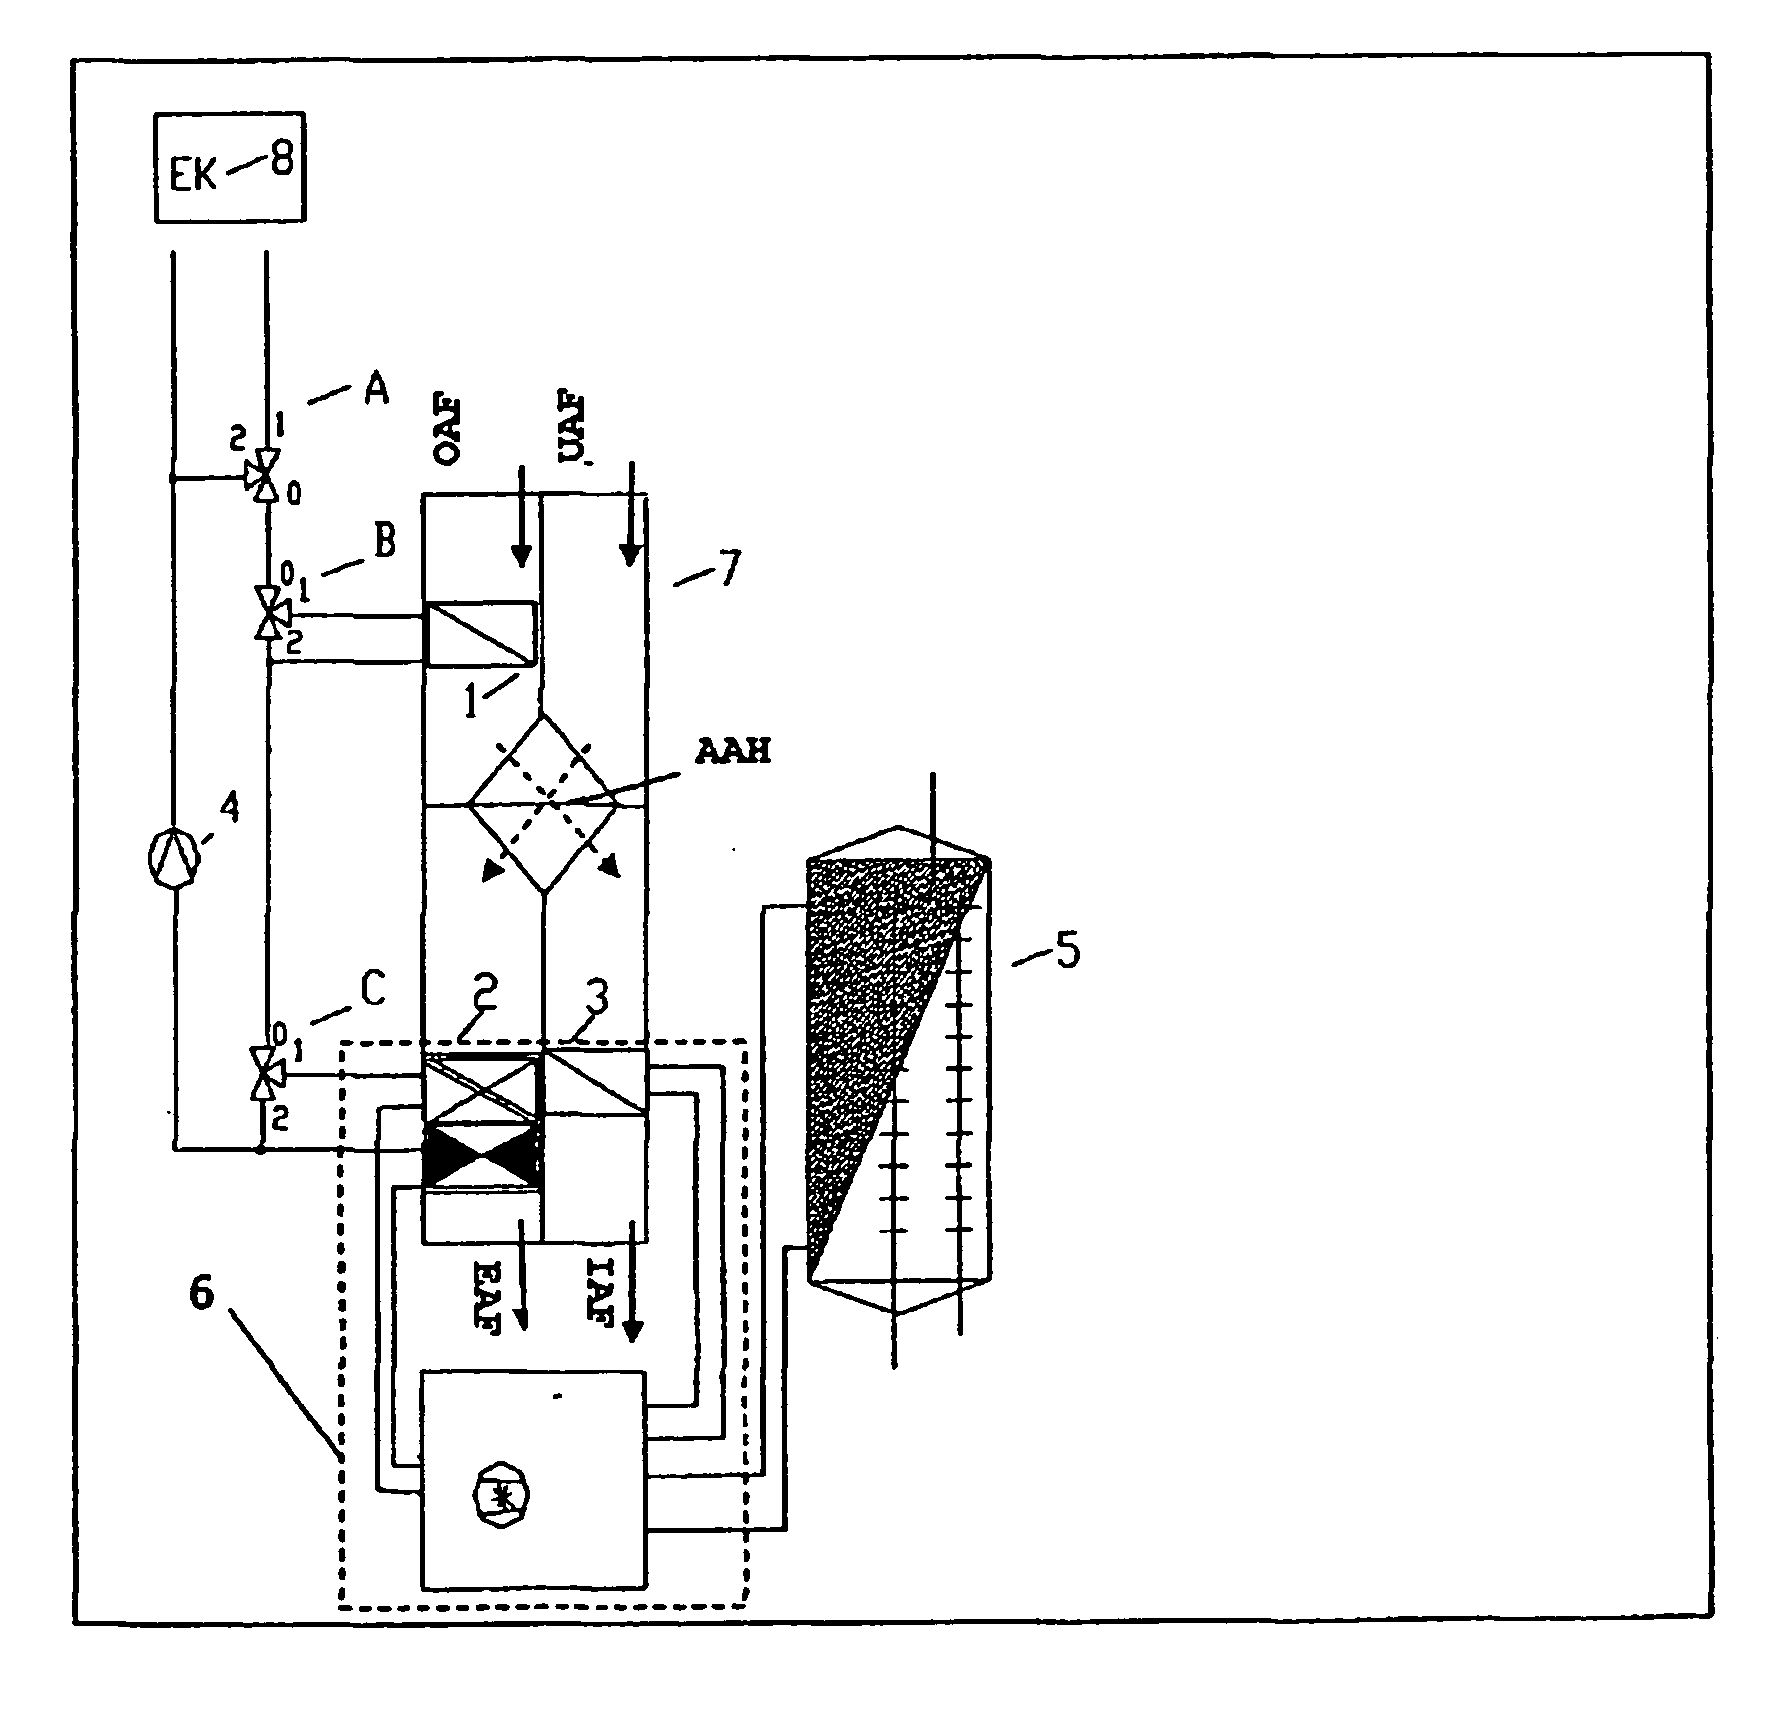 Combined Fluid-Air Evaporator And Novel Switching Concept For A Heat Pump In A Ventilating Apparatus